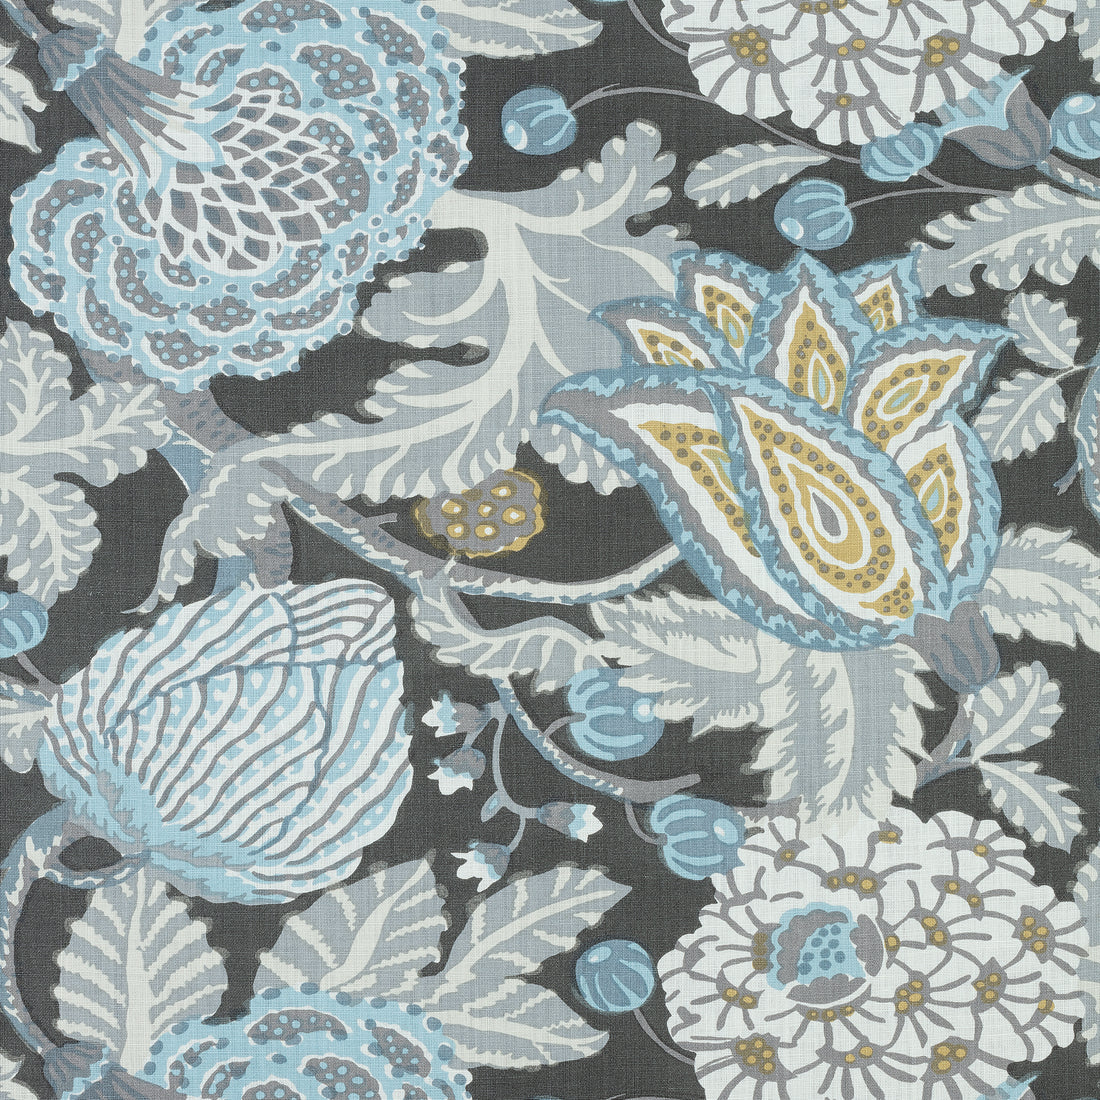 Mitford fabric in grey color - pattern number F92944 - by Thibaut in the Paramount collection